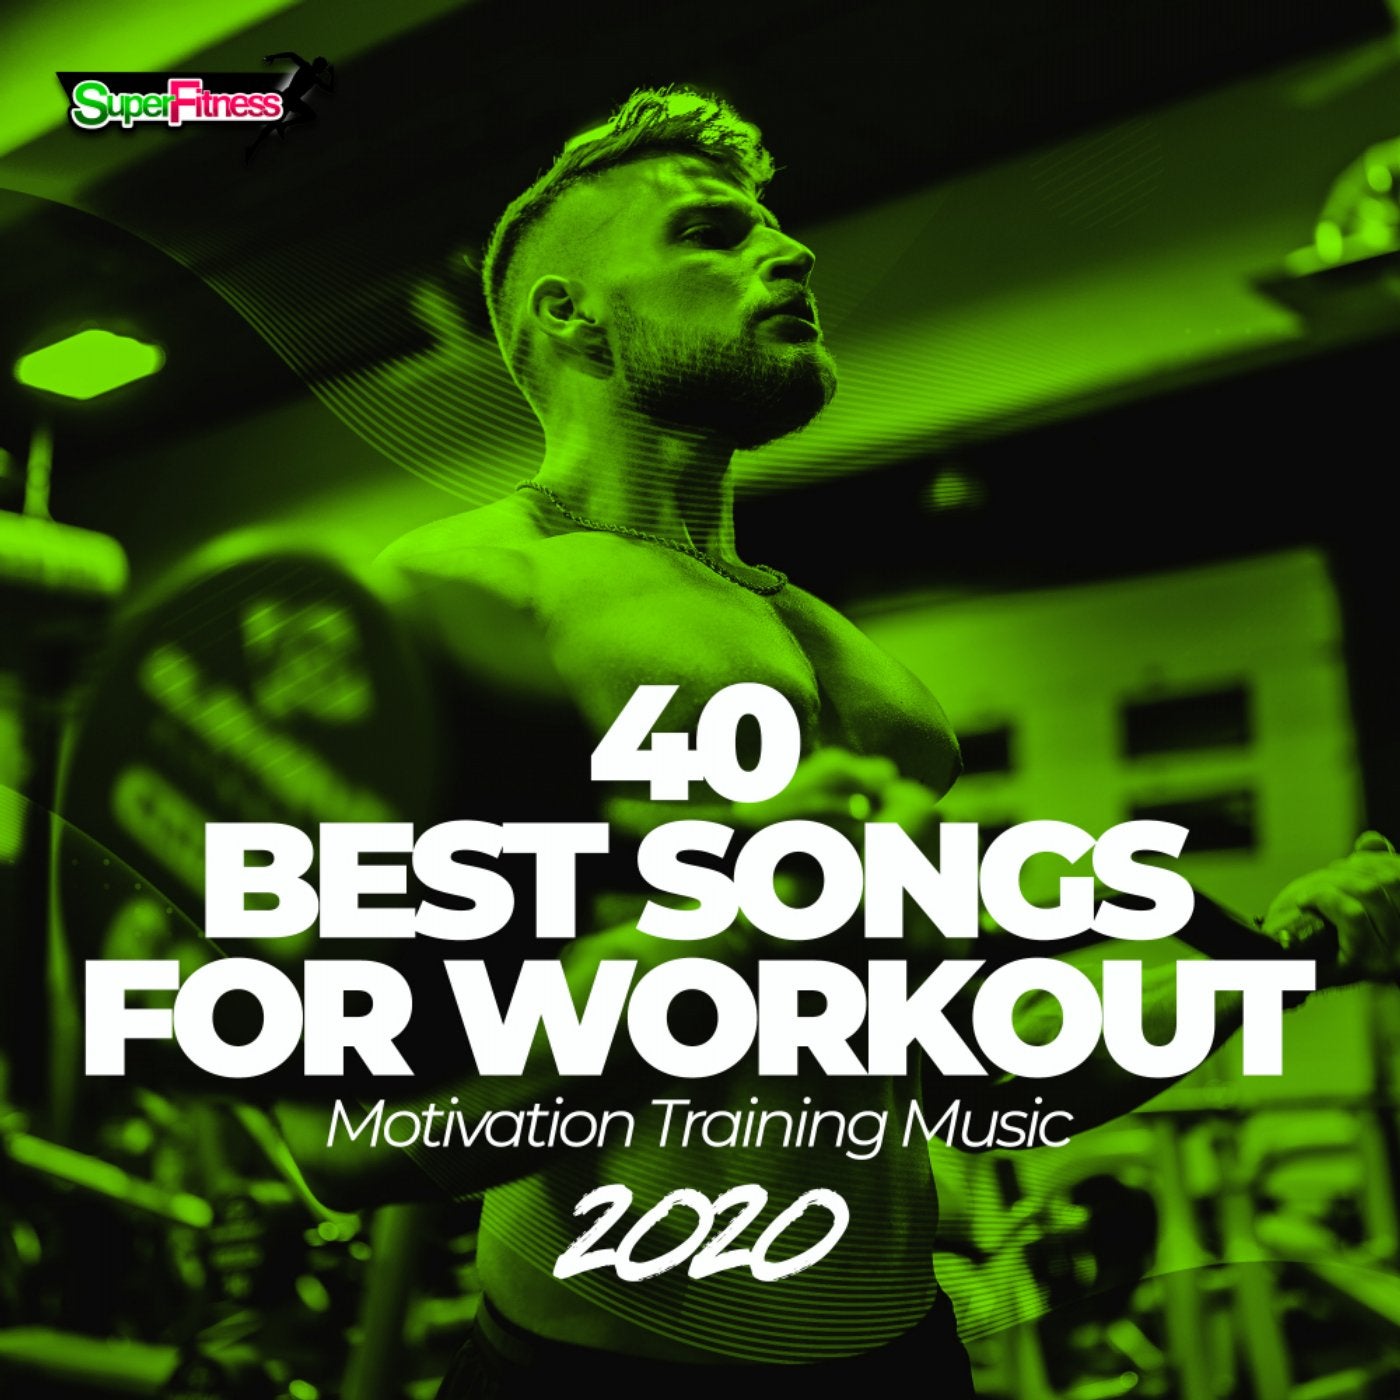 40 Best Songs For Workout 2020: Motivation Training Music